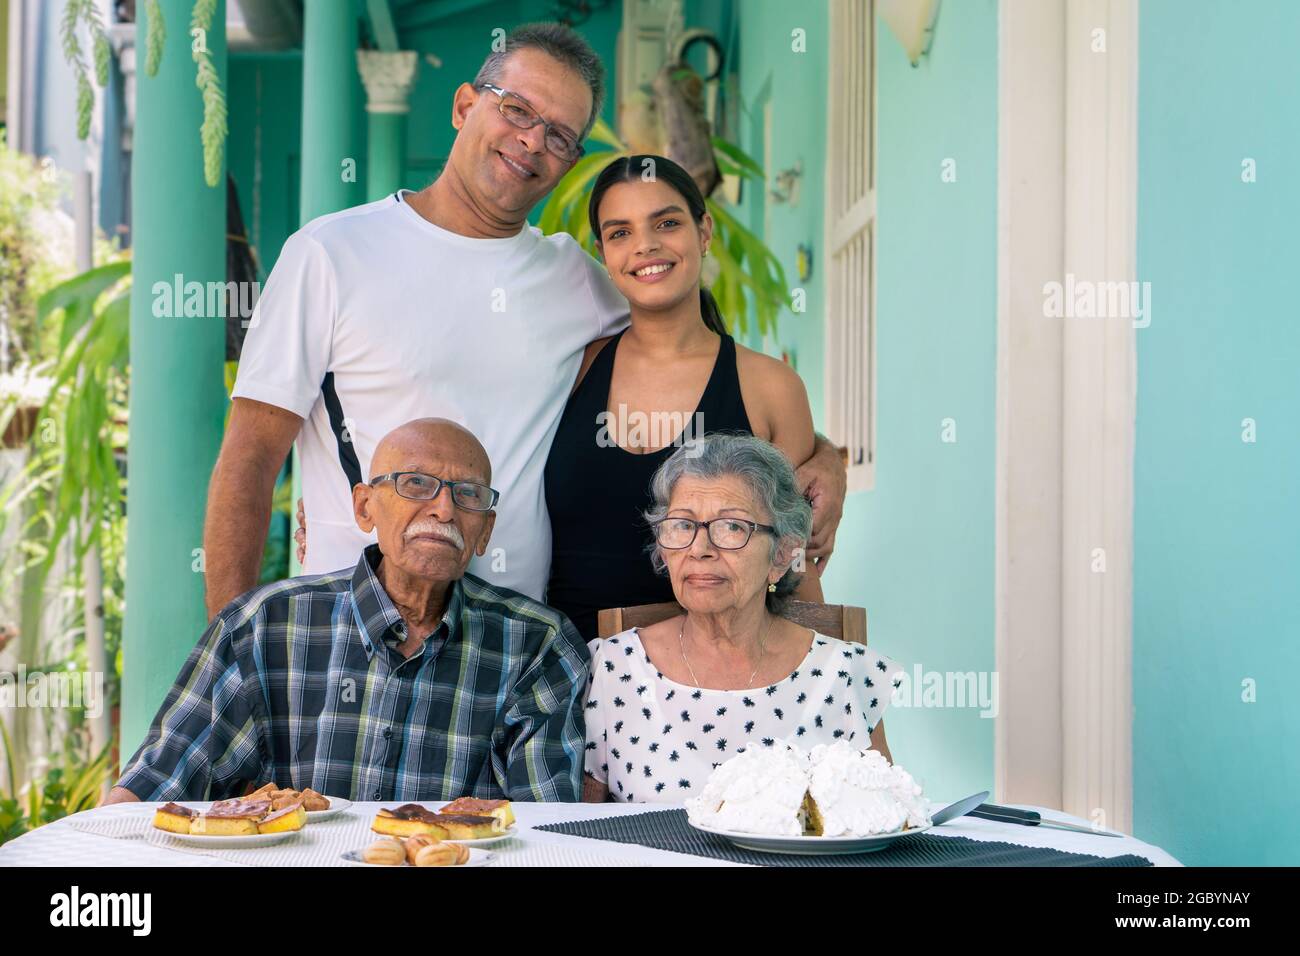 Elderly couple wearing eyeglasses sitting at a table and a man and a young woman standing behind the elderly Stock Photo